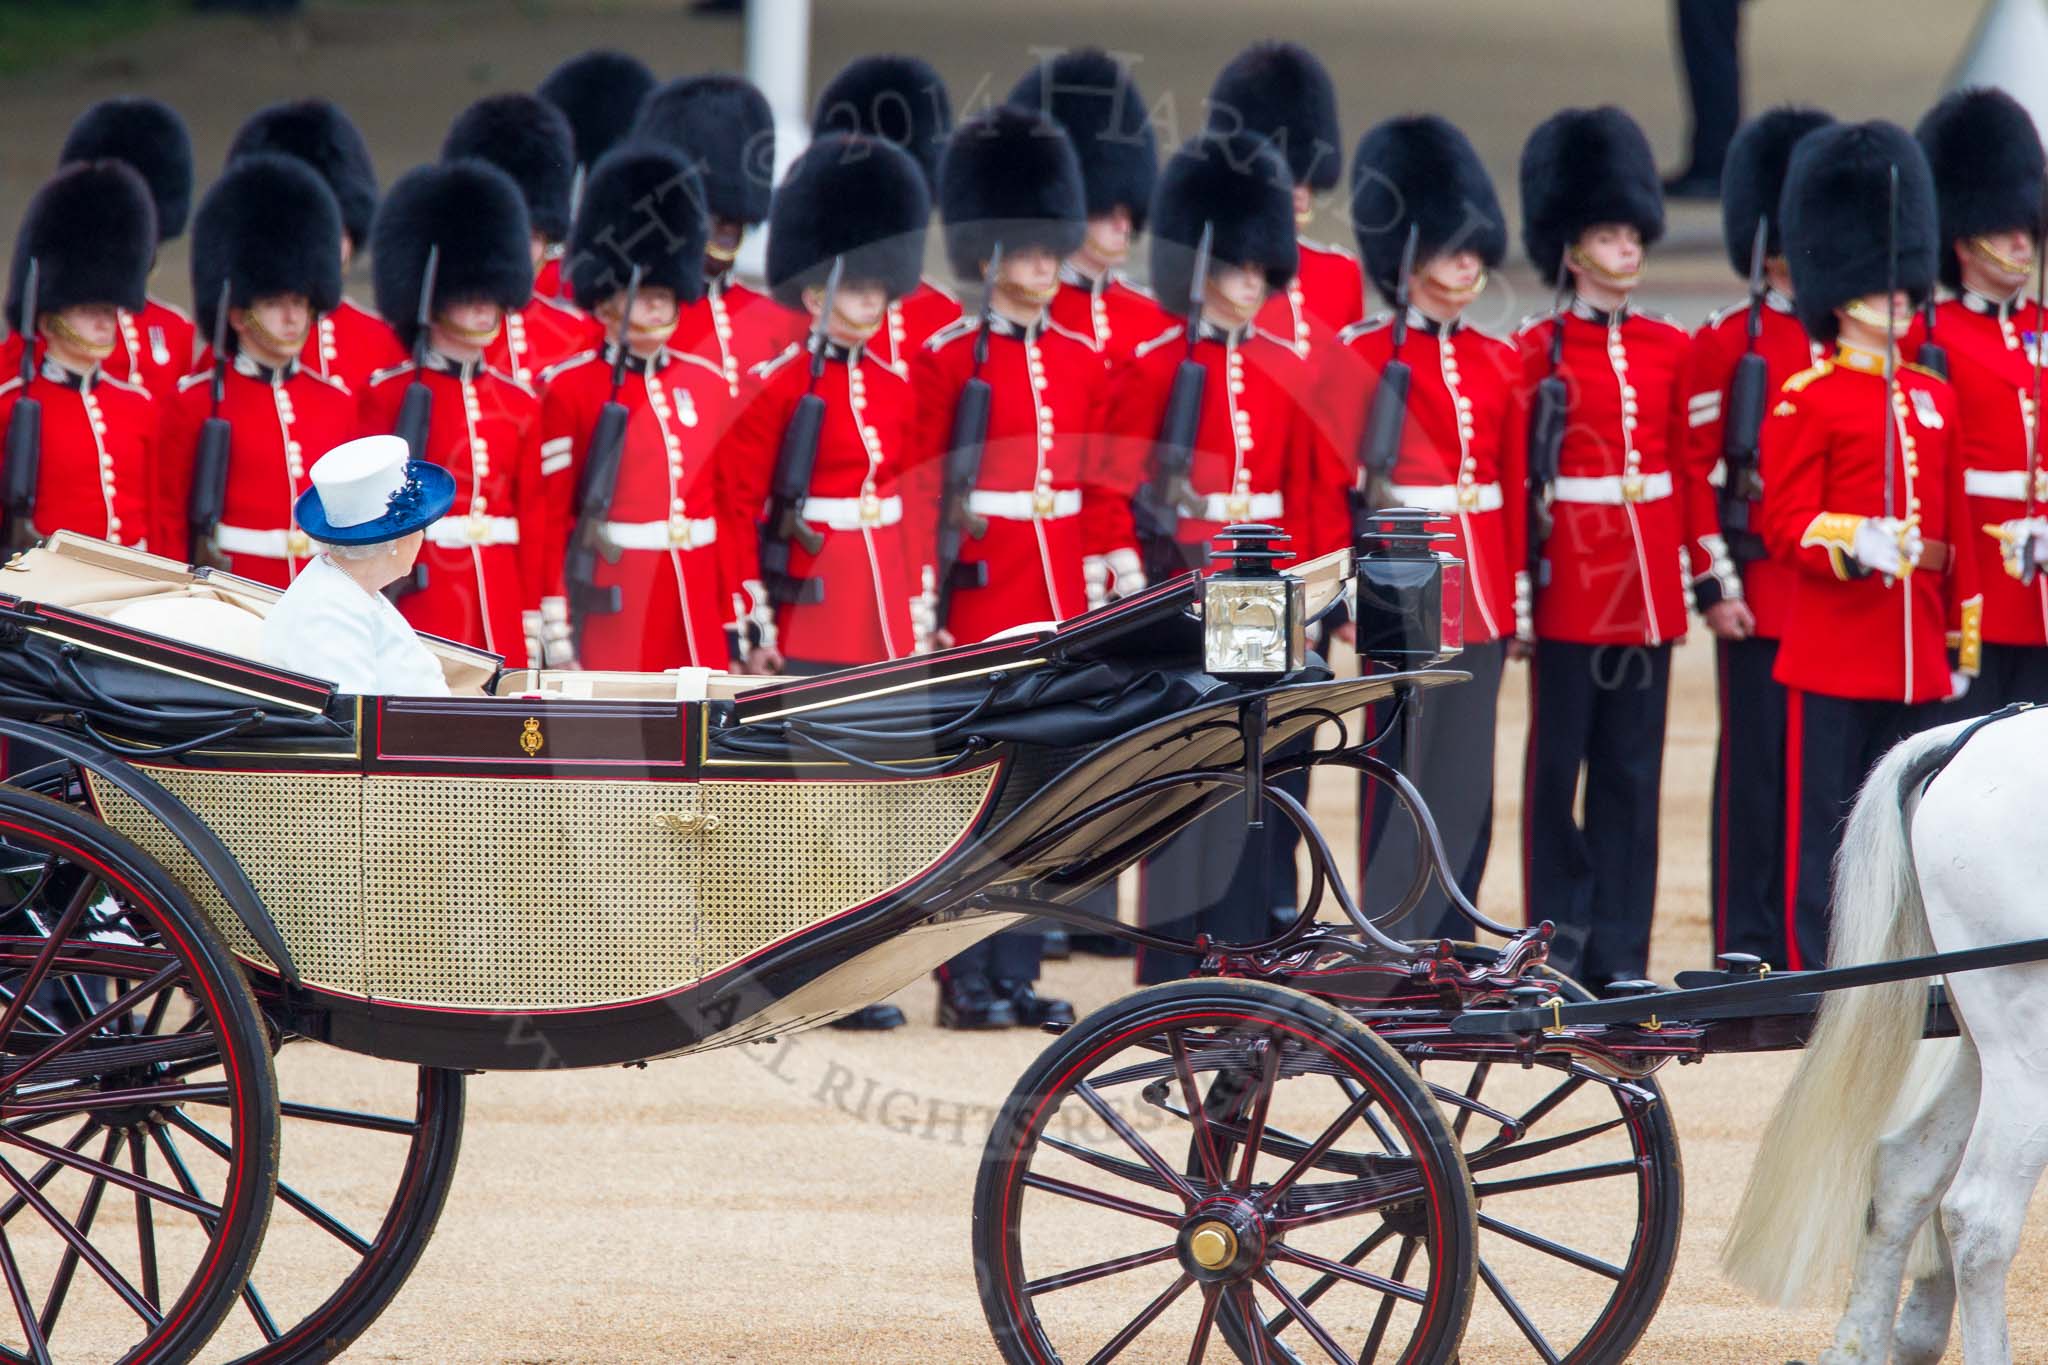 Trooping the Colour 2014.
Horse Guards Parade, Westminster,
London SW1A,

United Kingdom,
on 14 June 2014 at 11:04, image #413